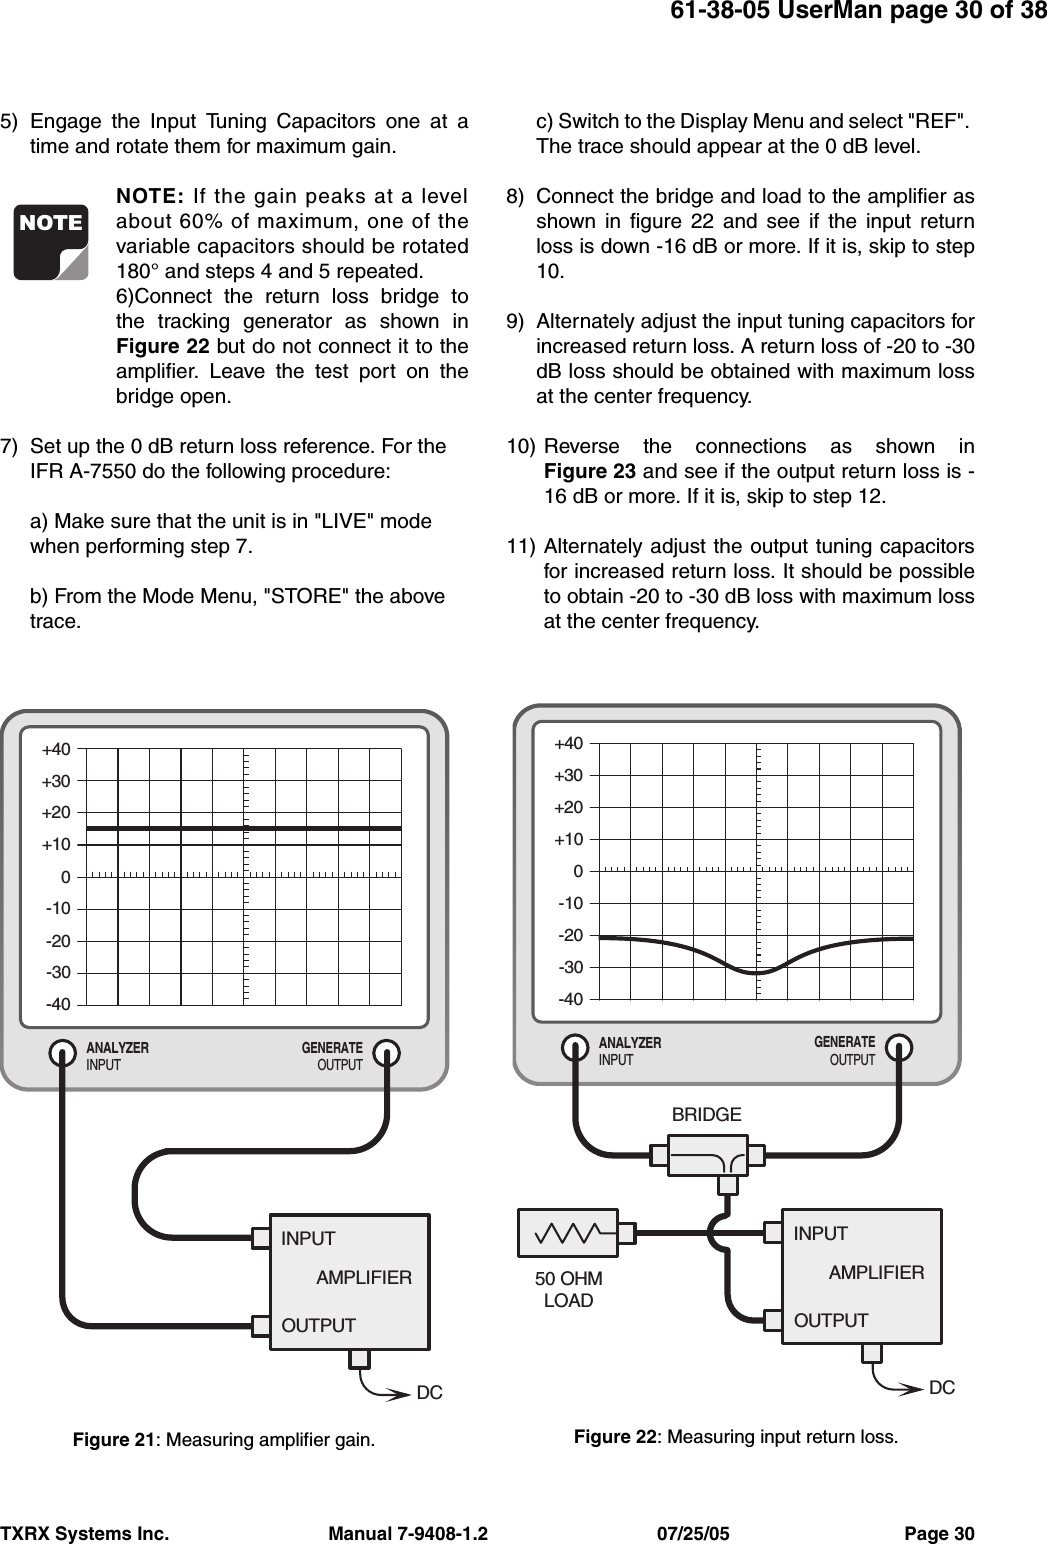 61-38-05 UserMan page 30 of 38TXRX Systems Inc.                               Manual 7-9408-1.2                                 07/25/05                                  Page 305) Engage the Input Tuning Capacitors one at atime and rotate them for maximum gain.NOTE: If the gain peaks at a levelabout 60% of maximum, one of thevariable capacitors should be rotated180° and steps 4 and 5 repeated.6)Connect the return loss bridge tothe tracking generator as shown inFigure 22 but do not connect it to theamplifier. Leave the test port on thebridge open.7) Set up the 0 dB return loss reference. For the IFR A-7550 do the following procedure:a) Make sure that the unit is in &quot;LIVE&quot; mode when performing step 7.b) From the Mode Menu, &quot;STORE&quot; the above trace.c) Switch to the Display Menu and select &quot;REF&quot;. The trace should appear at the 0 dB level.8) Connect the bridge and load to the amplifier asshown in figure 22 and see if the input returnloss is down -16 dB or more. If it is, skip to step10.9) Alternately adjust the input tuning capacitors forincreased return loss. A return loss of -20 to -30dB loss should be obtained with maximum lossat the center frequency.10) Reverse the connections as shown inFigure 23 and see if the output return loss is -16 dB or more. If it is, skip to step 12.11) Alternately adjust the output tuning capacitorsfor increased return loss. It should be possibleto obtain -20 to -30 dB loss with maximum lossat the center frequency.NOTEGENERATEOUTPUTANALYZERINPUT+40+30+20+100-10-20-30-40BRIDGEDCAMPLIFIERINPUTOUTPUT50 OHMLOADFigure 22: Measuring input return loss.GENERATEOUTPUTANALYZERINPUT+40+30+20+100-10-20-30-40DCAMPLIFIERINPUTOUTPUTFigure 21: Measuring amplifier gain.